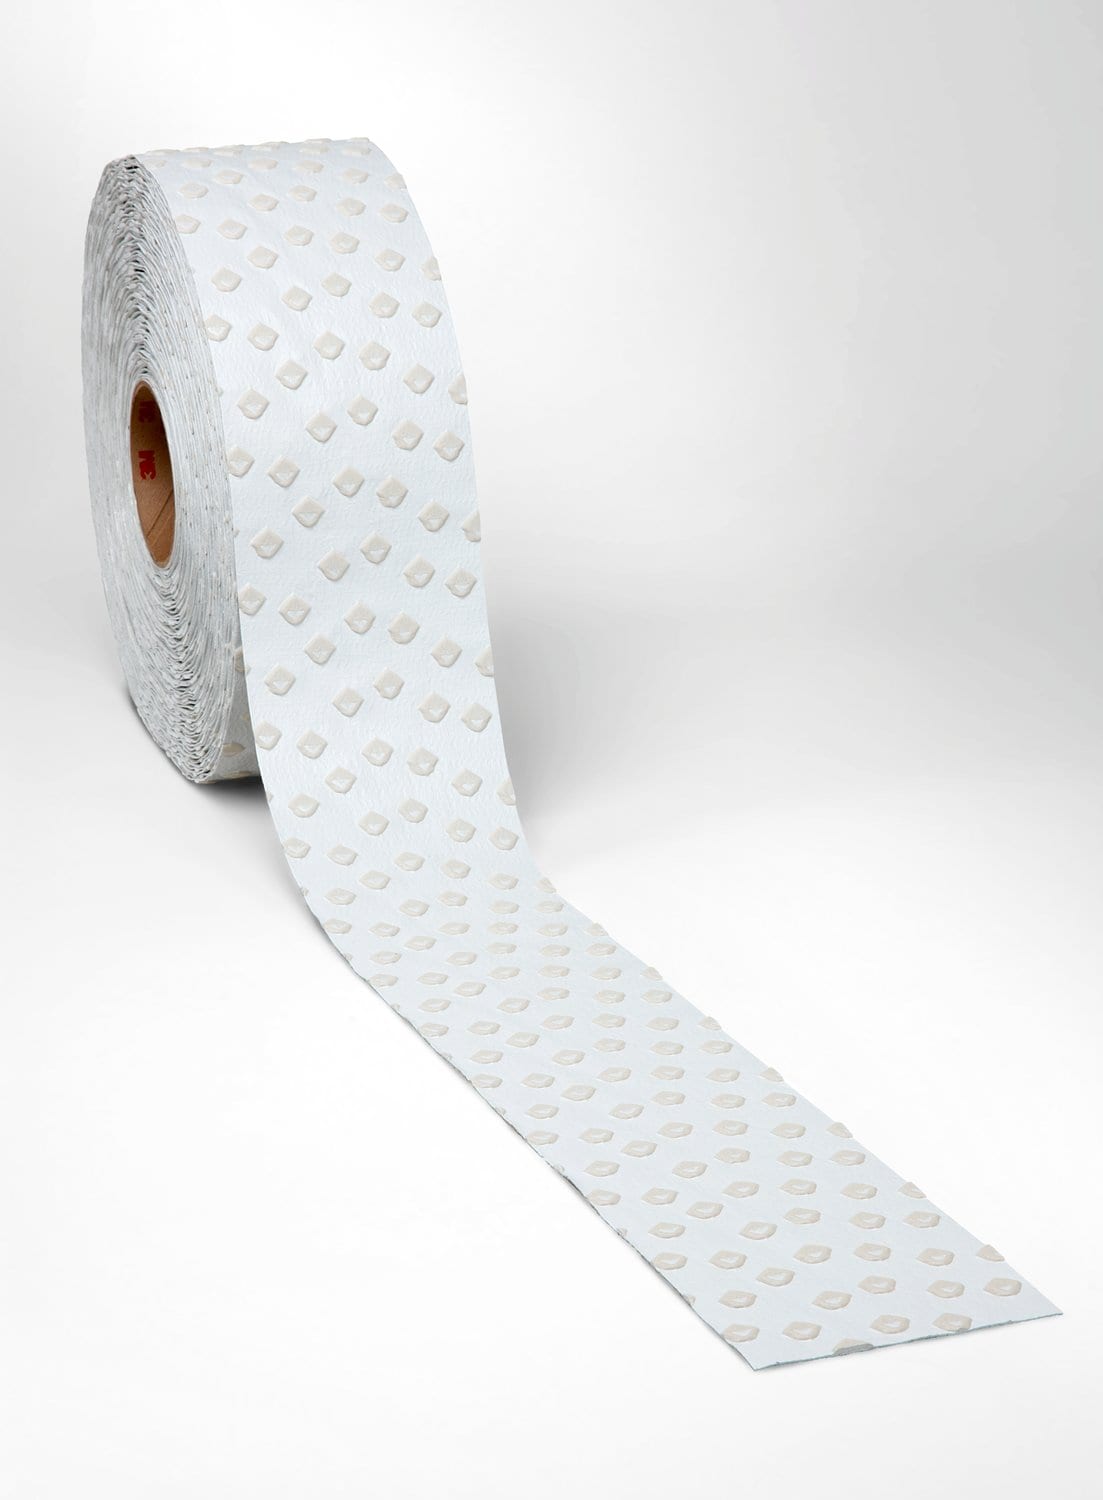 7010390929 - 3M Stamark Removable Pavement Marking Tape A710, White, 8 in x 40 yd